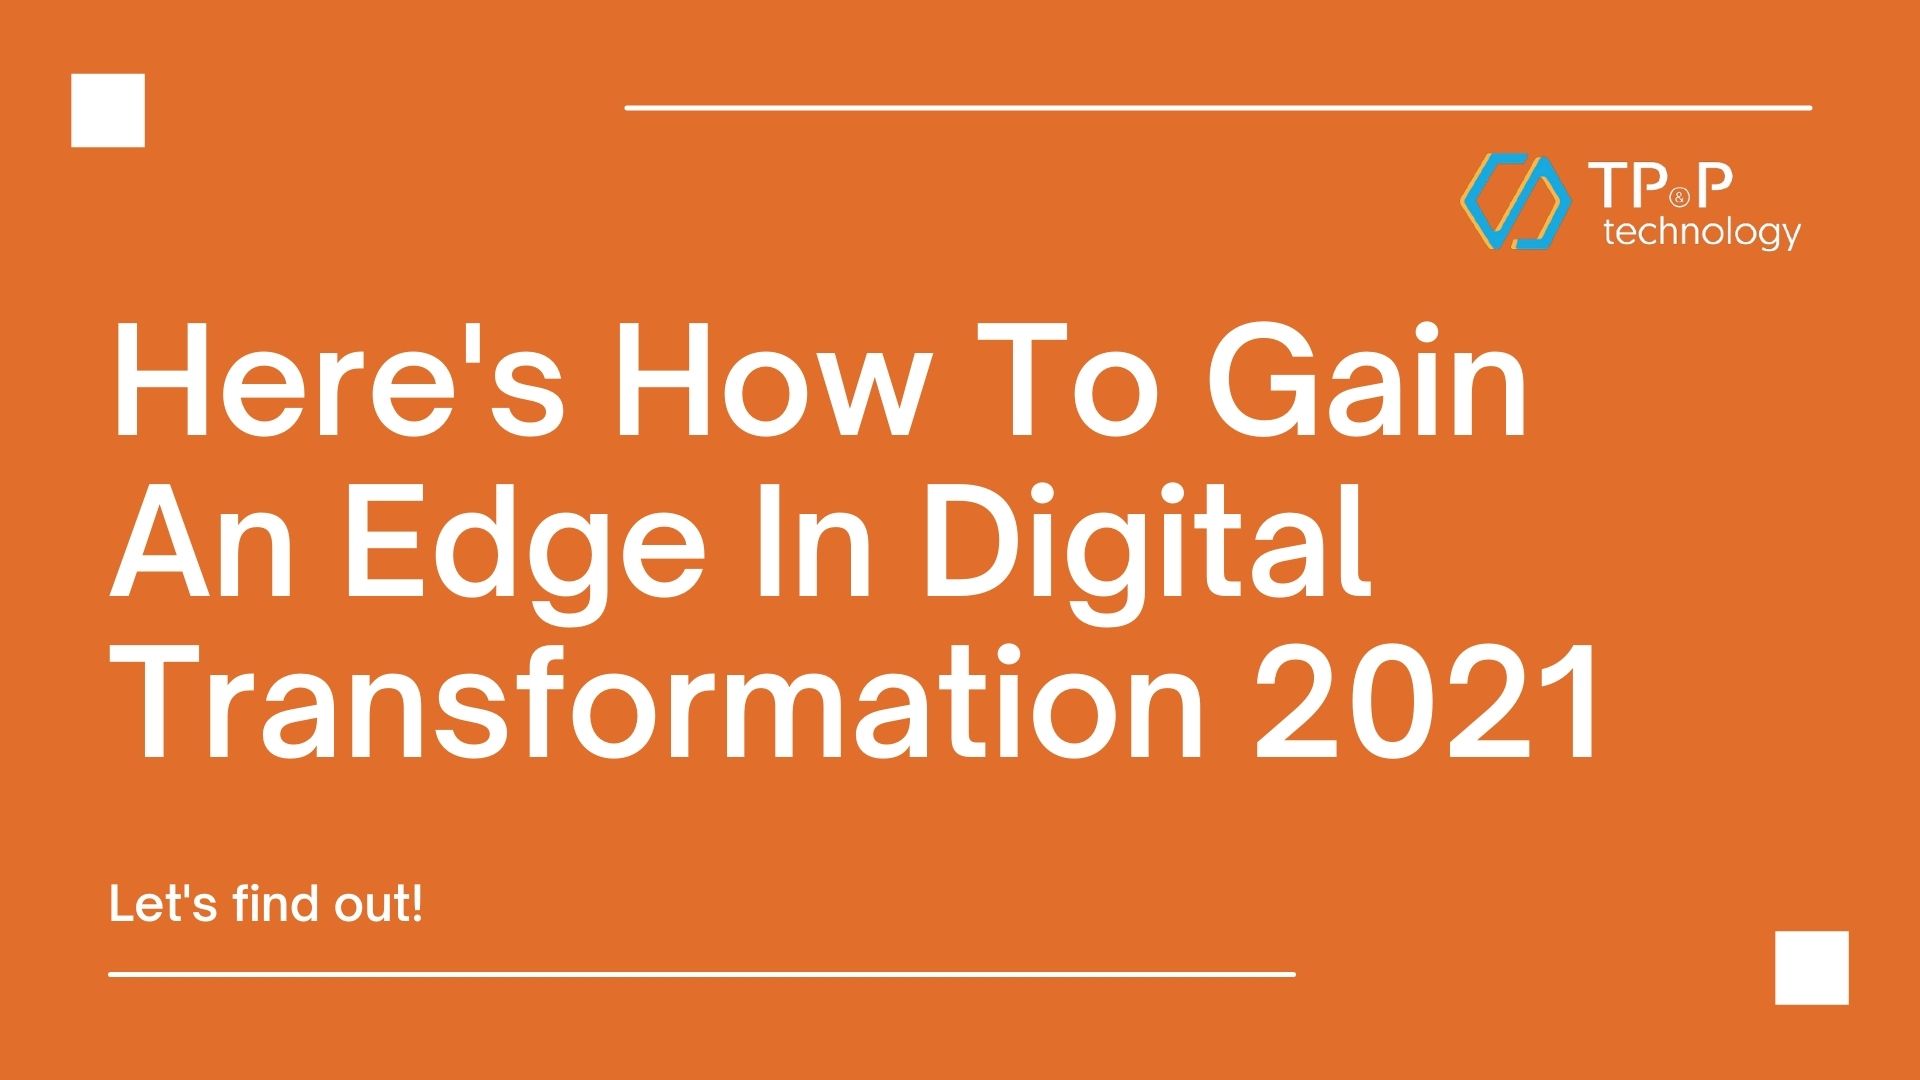 Here's How To Gain An Edge In Digital Transformation 2021